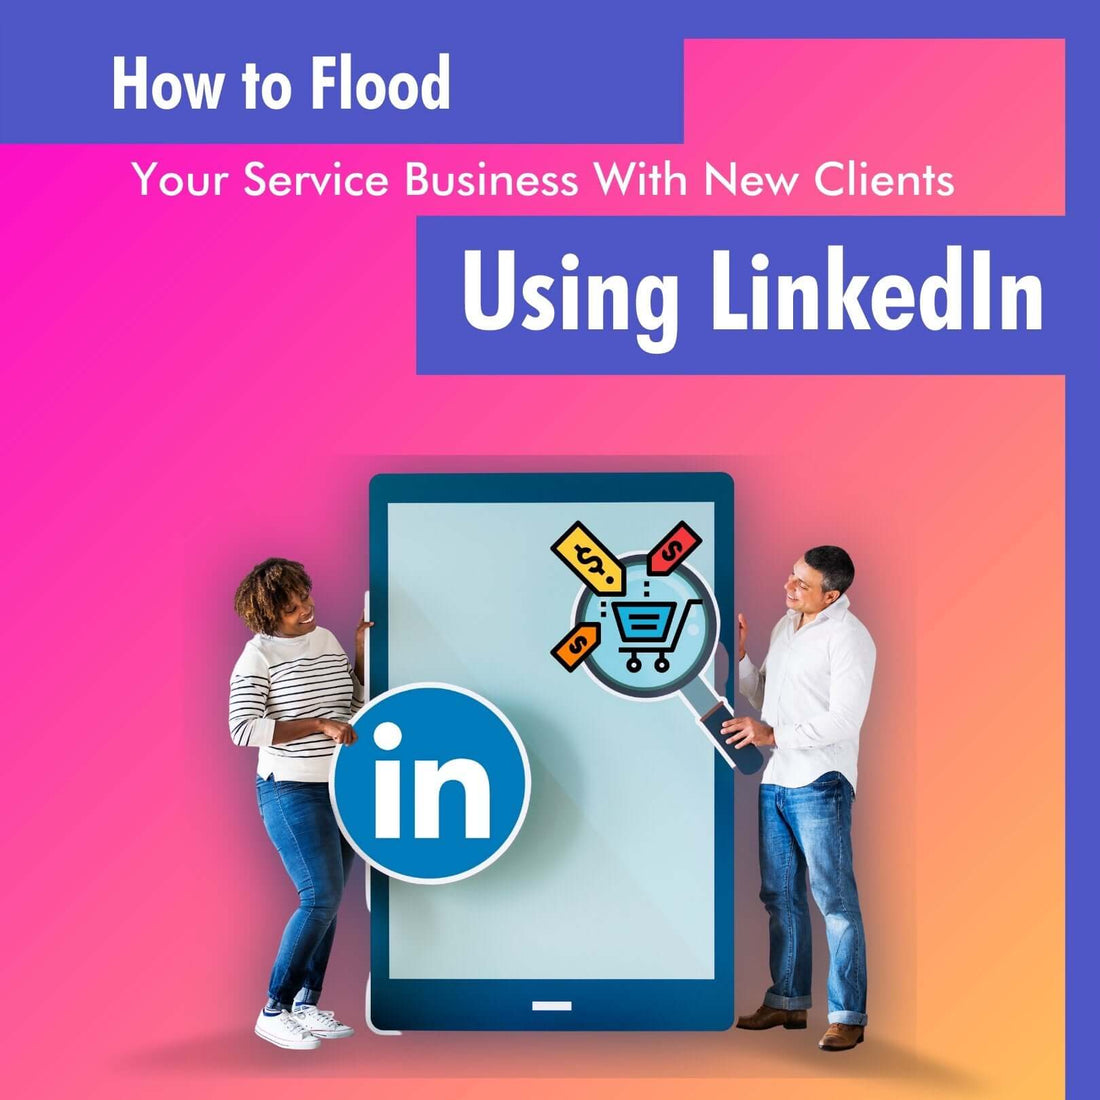 How to Flood Your Service Business With New Clients Using LinkedIn